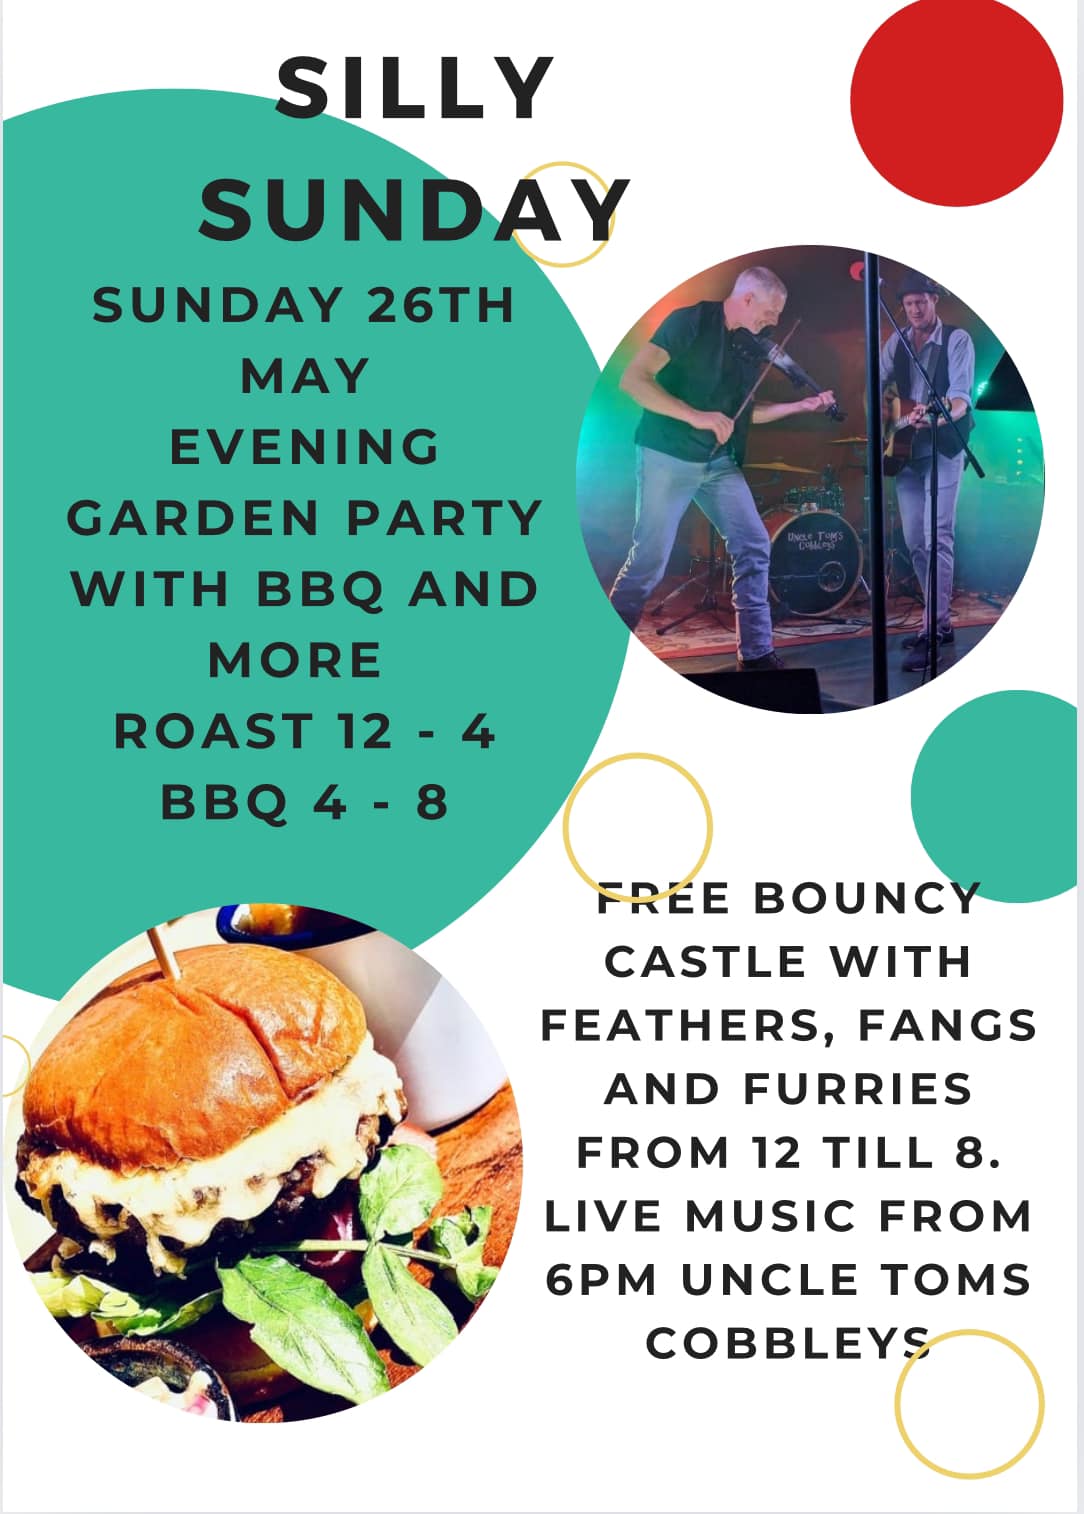 Garden Party and BBQ with live music from UNCLE TOM'S COBBLEYS